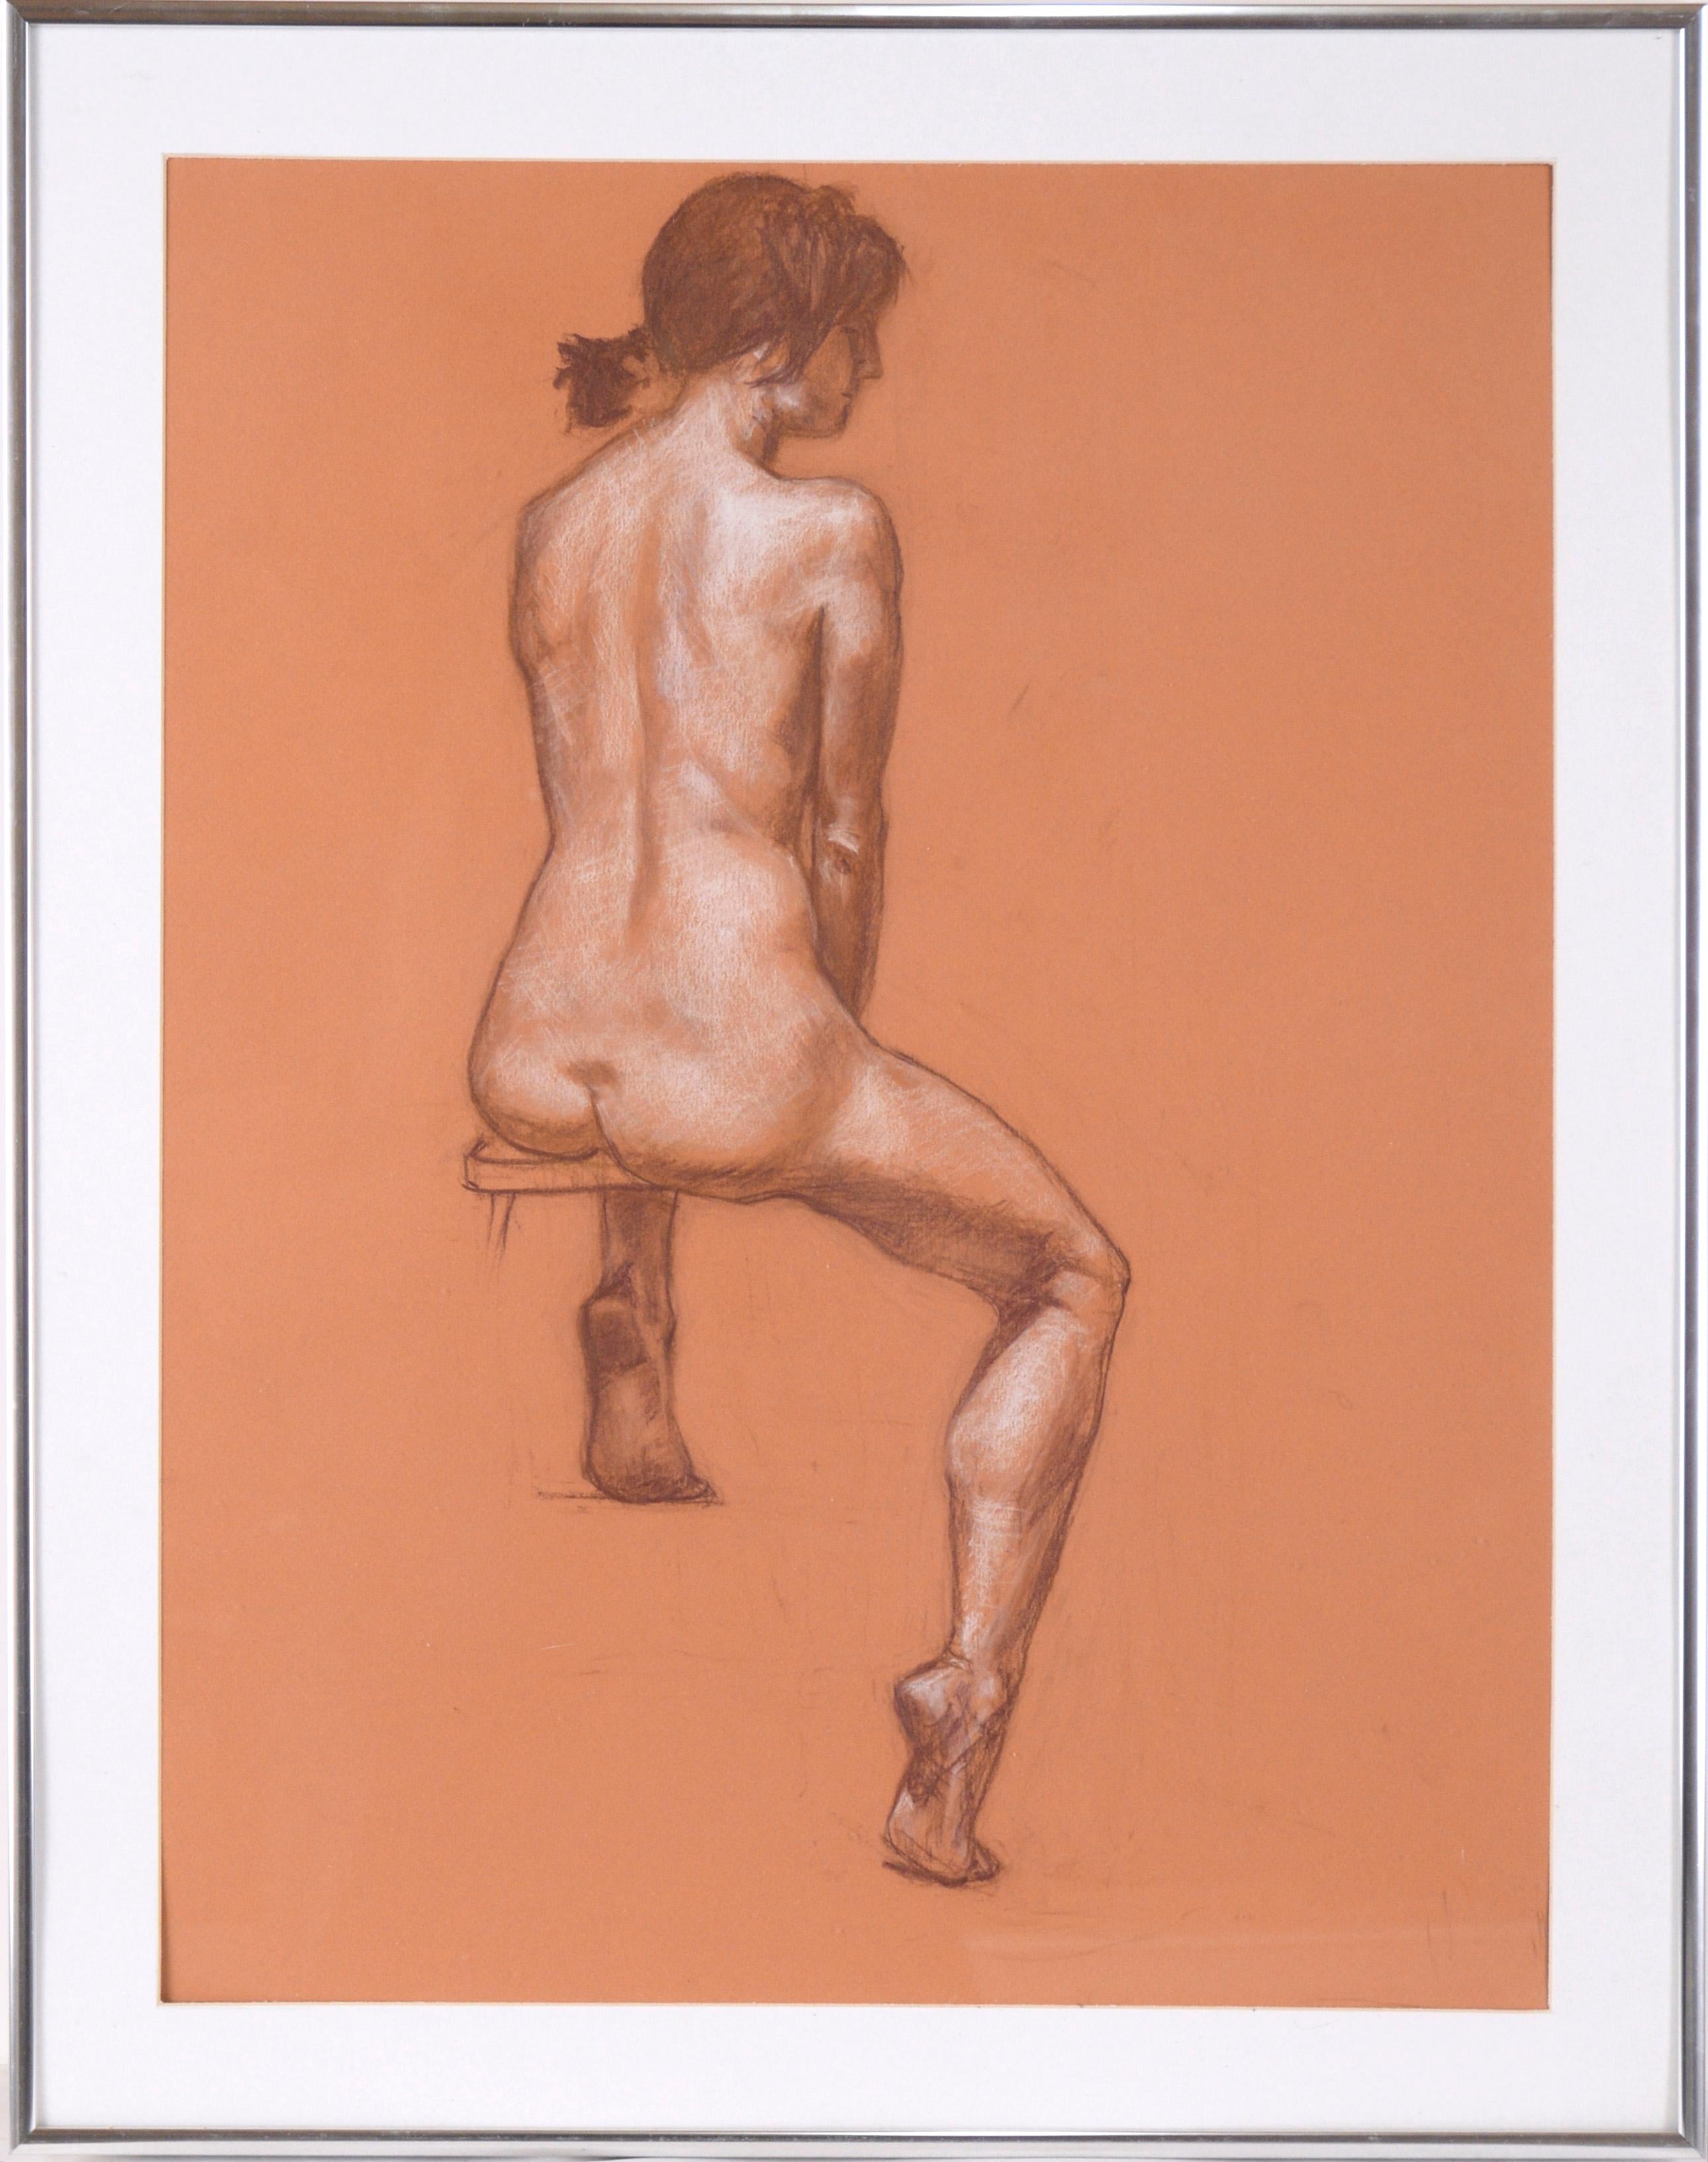 "Seated Figure" Nude in Pastel and Color Pencil on Paper